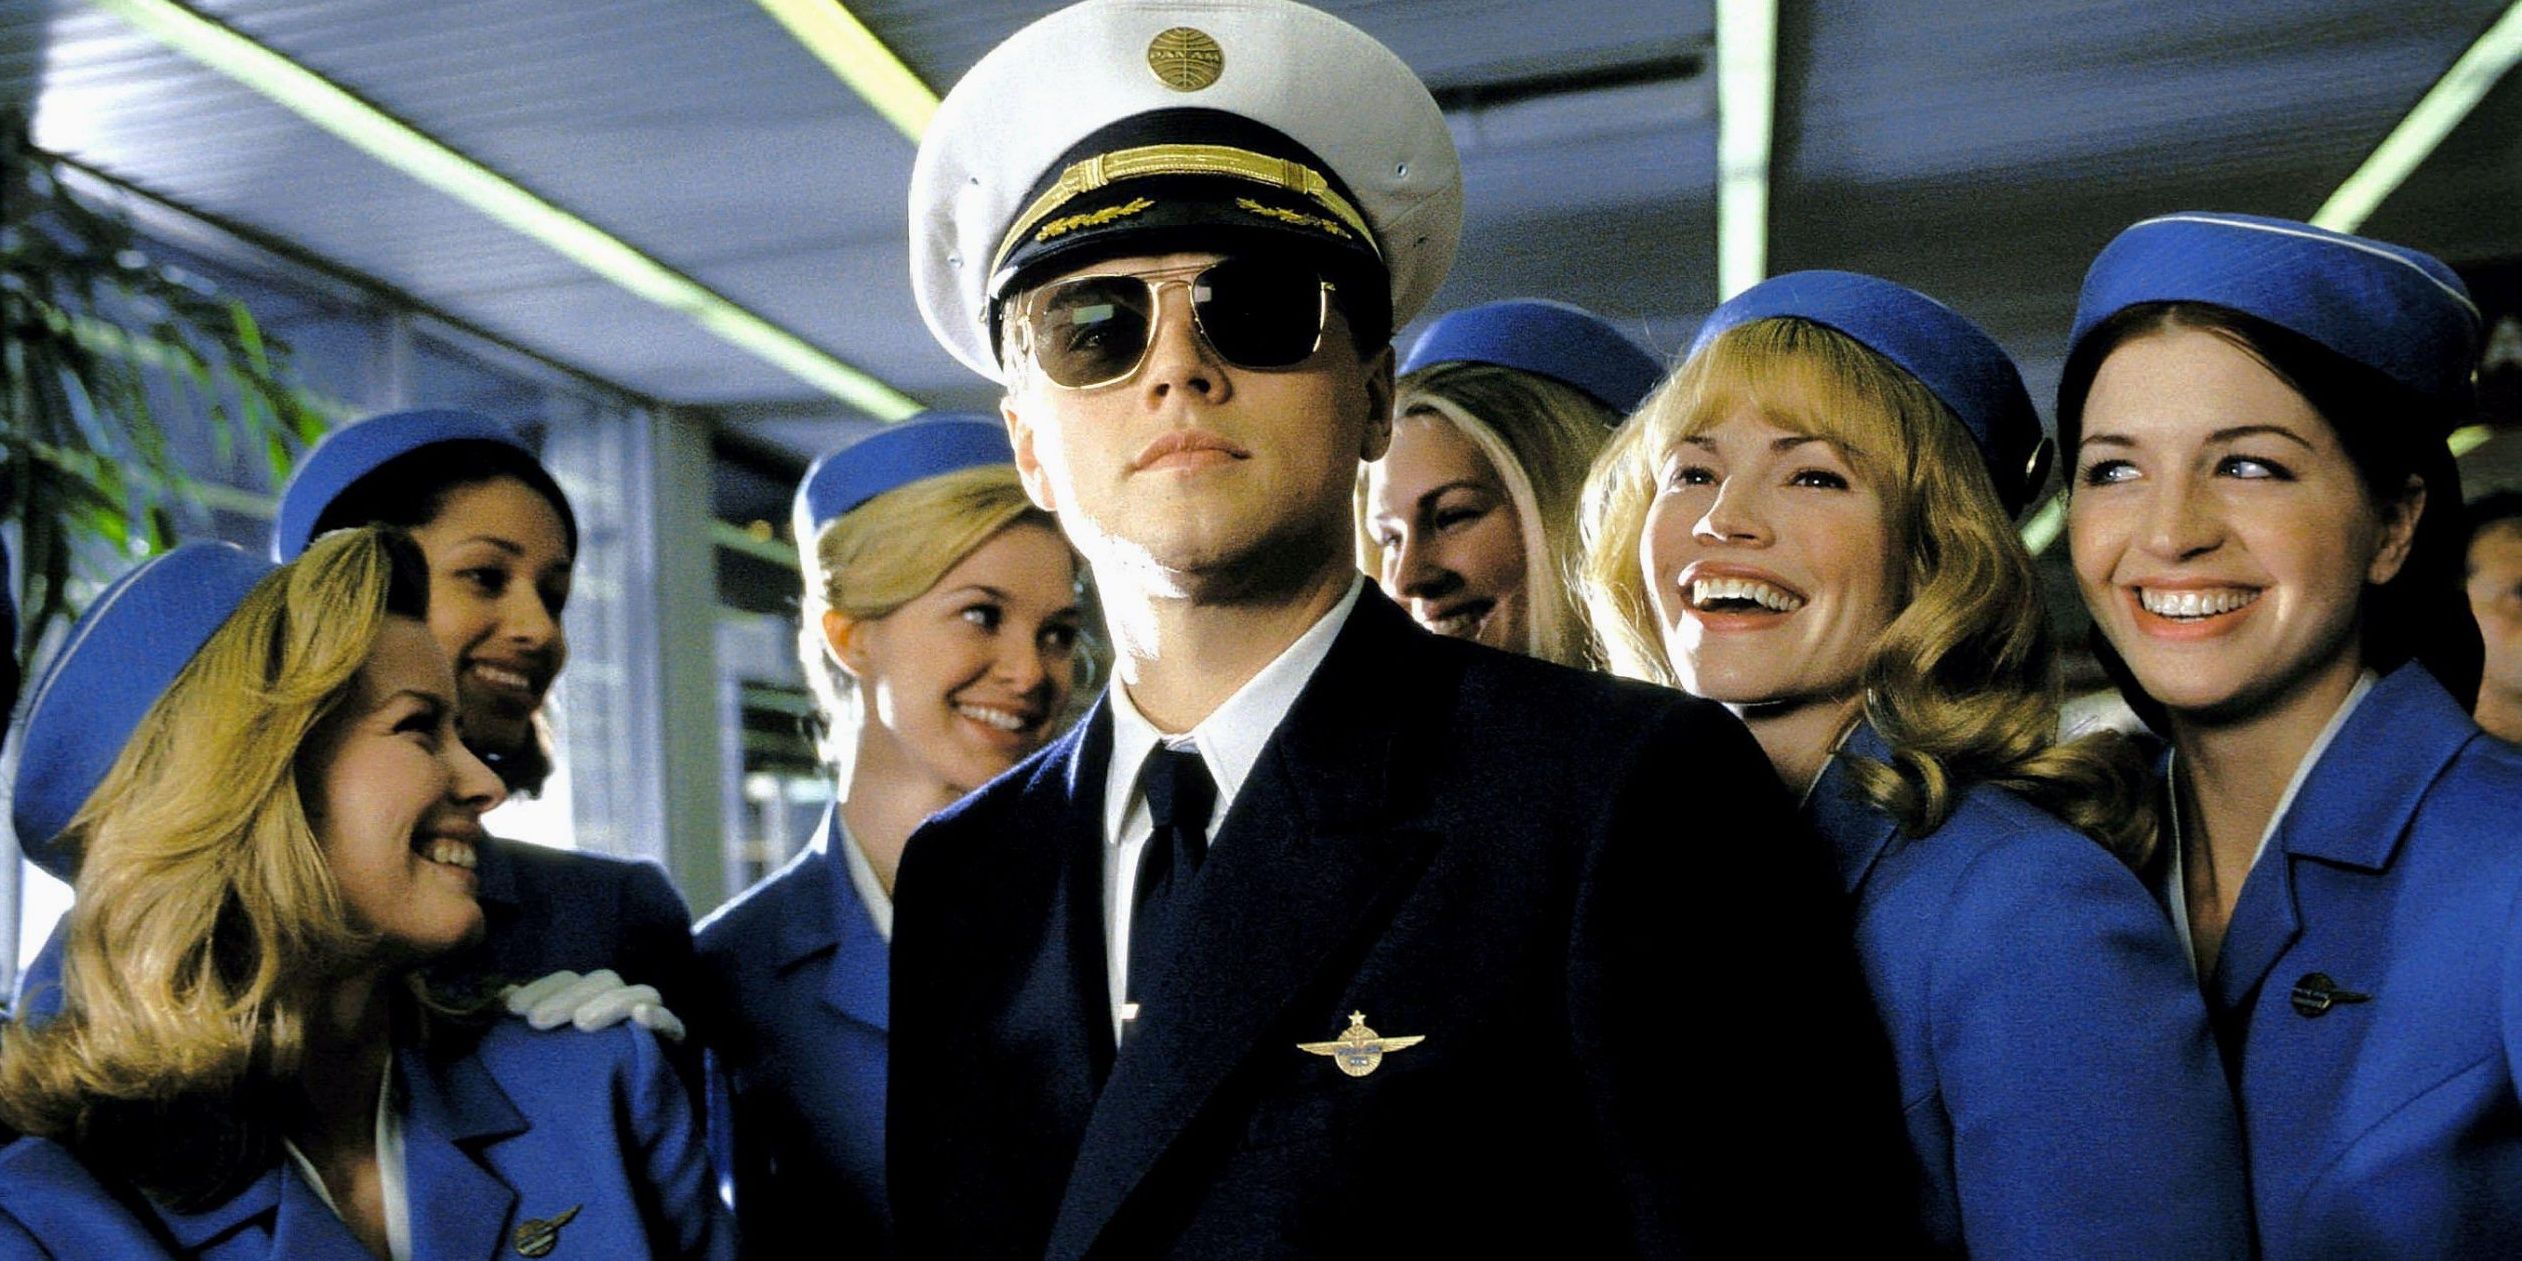 Frank Abagnale in pilot uniform with flight attendants in Catch Me If You Can.